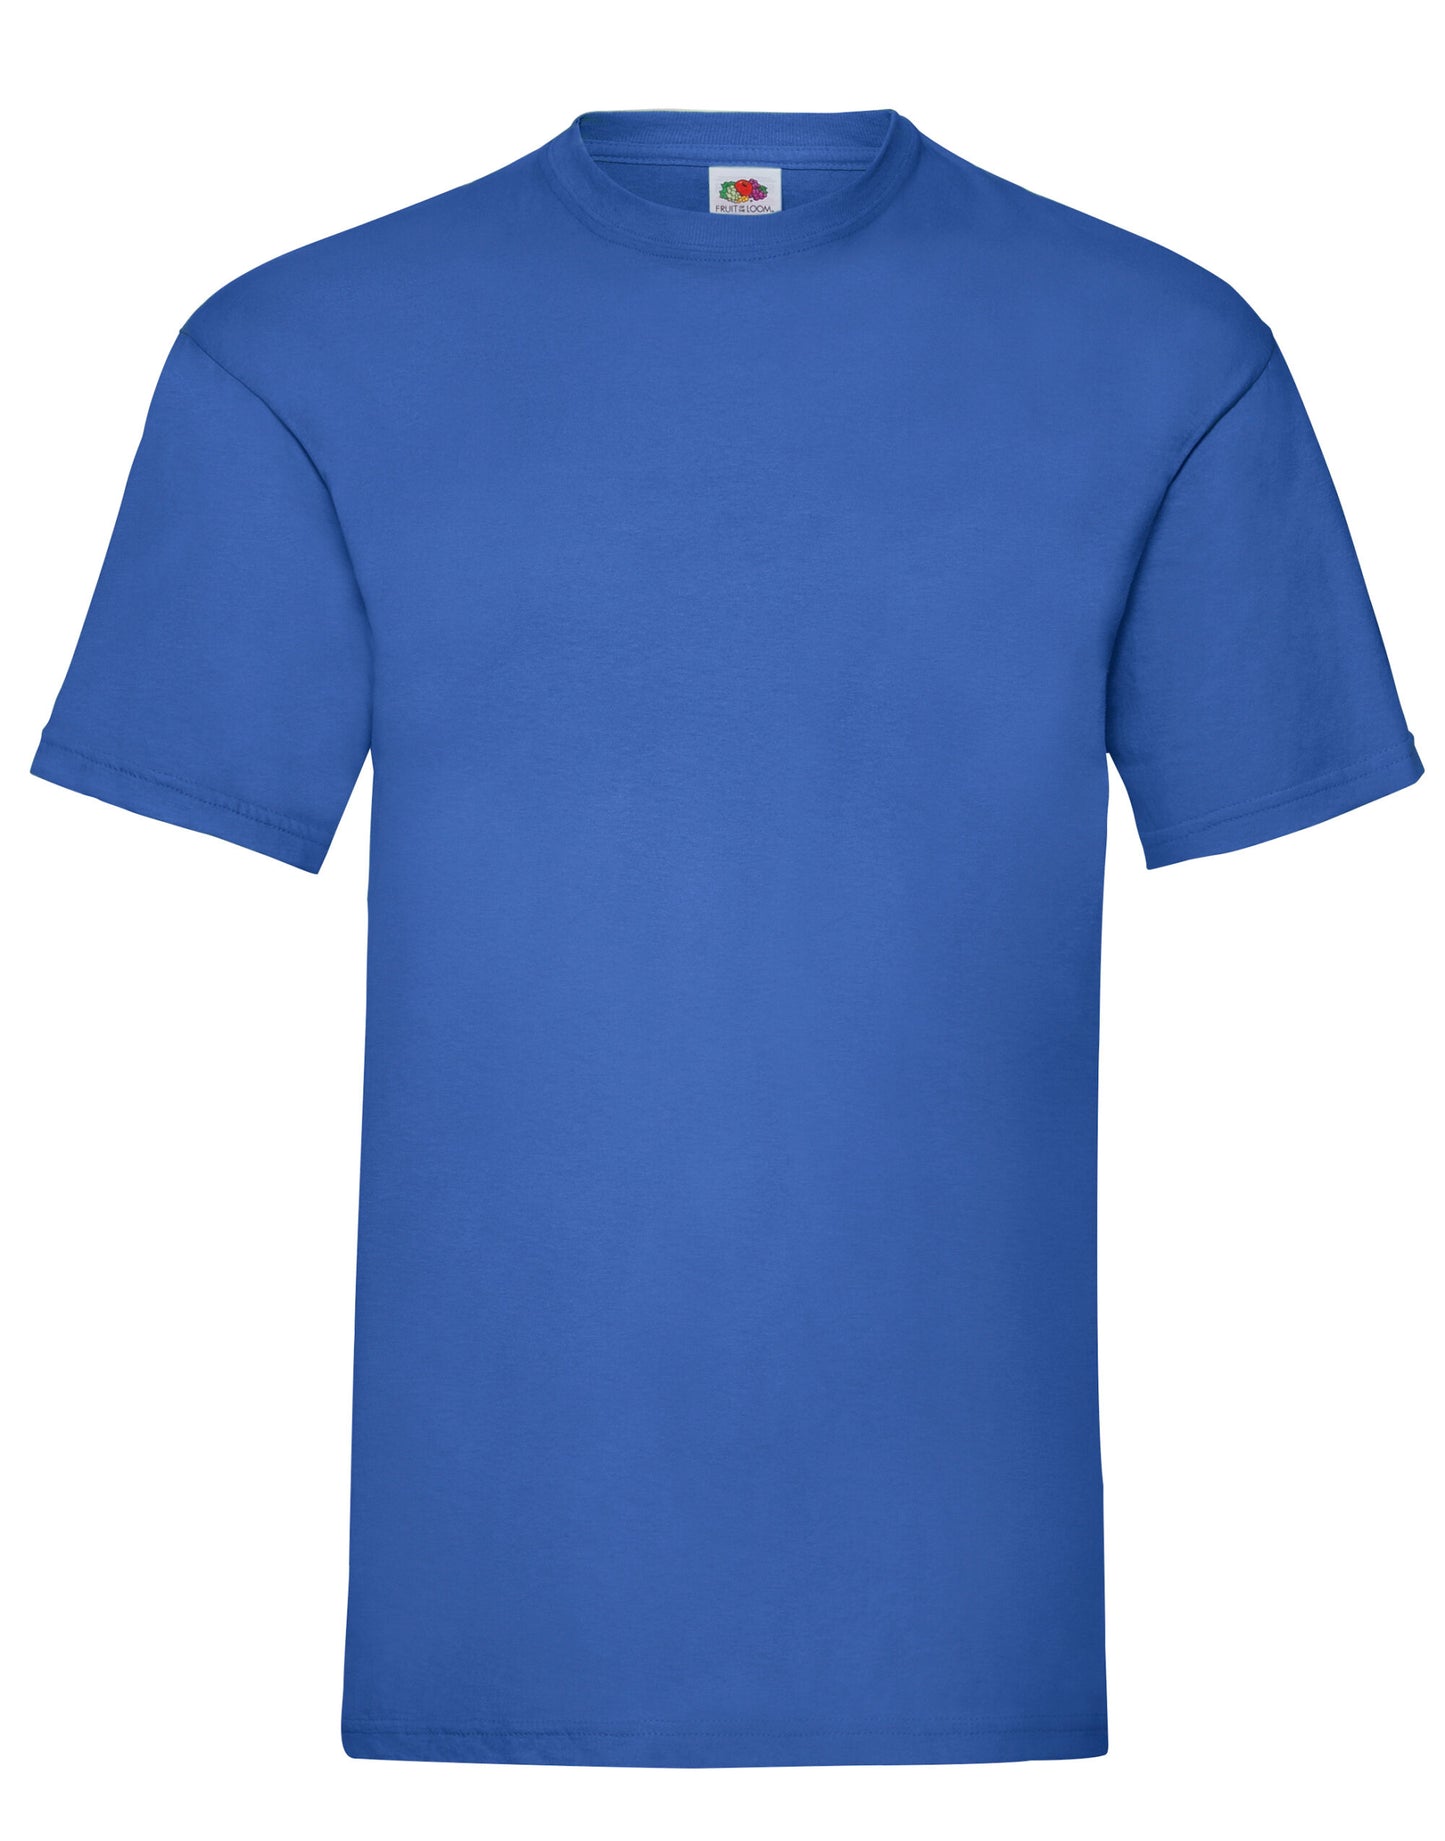 Fruit of the Loom Men's Fitted Valueweight T